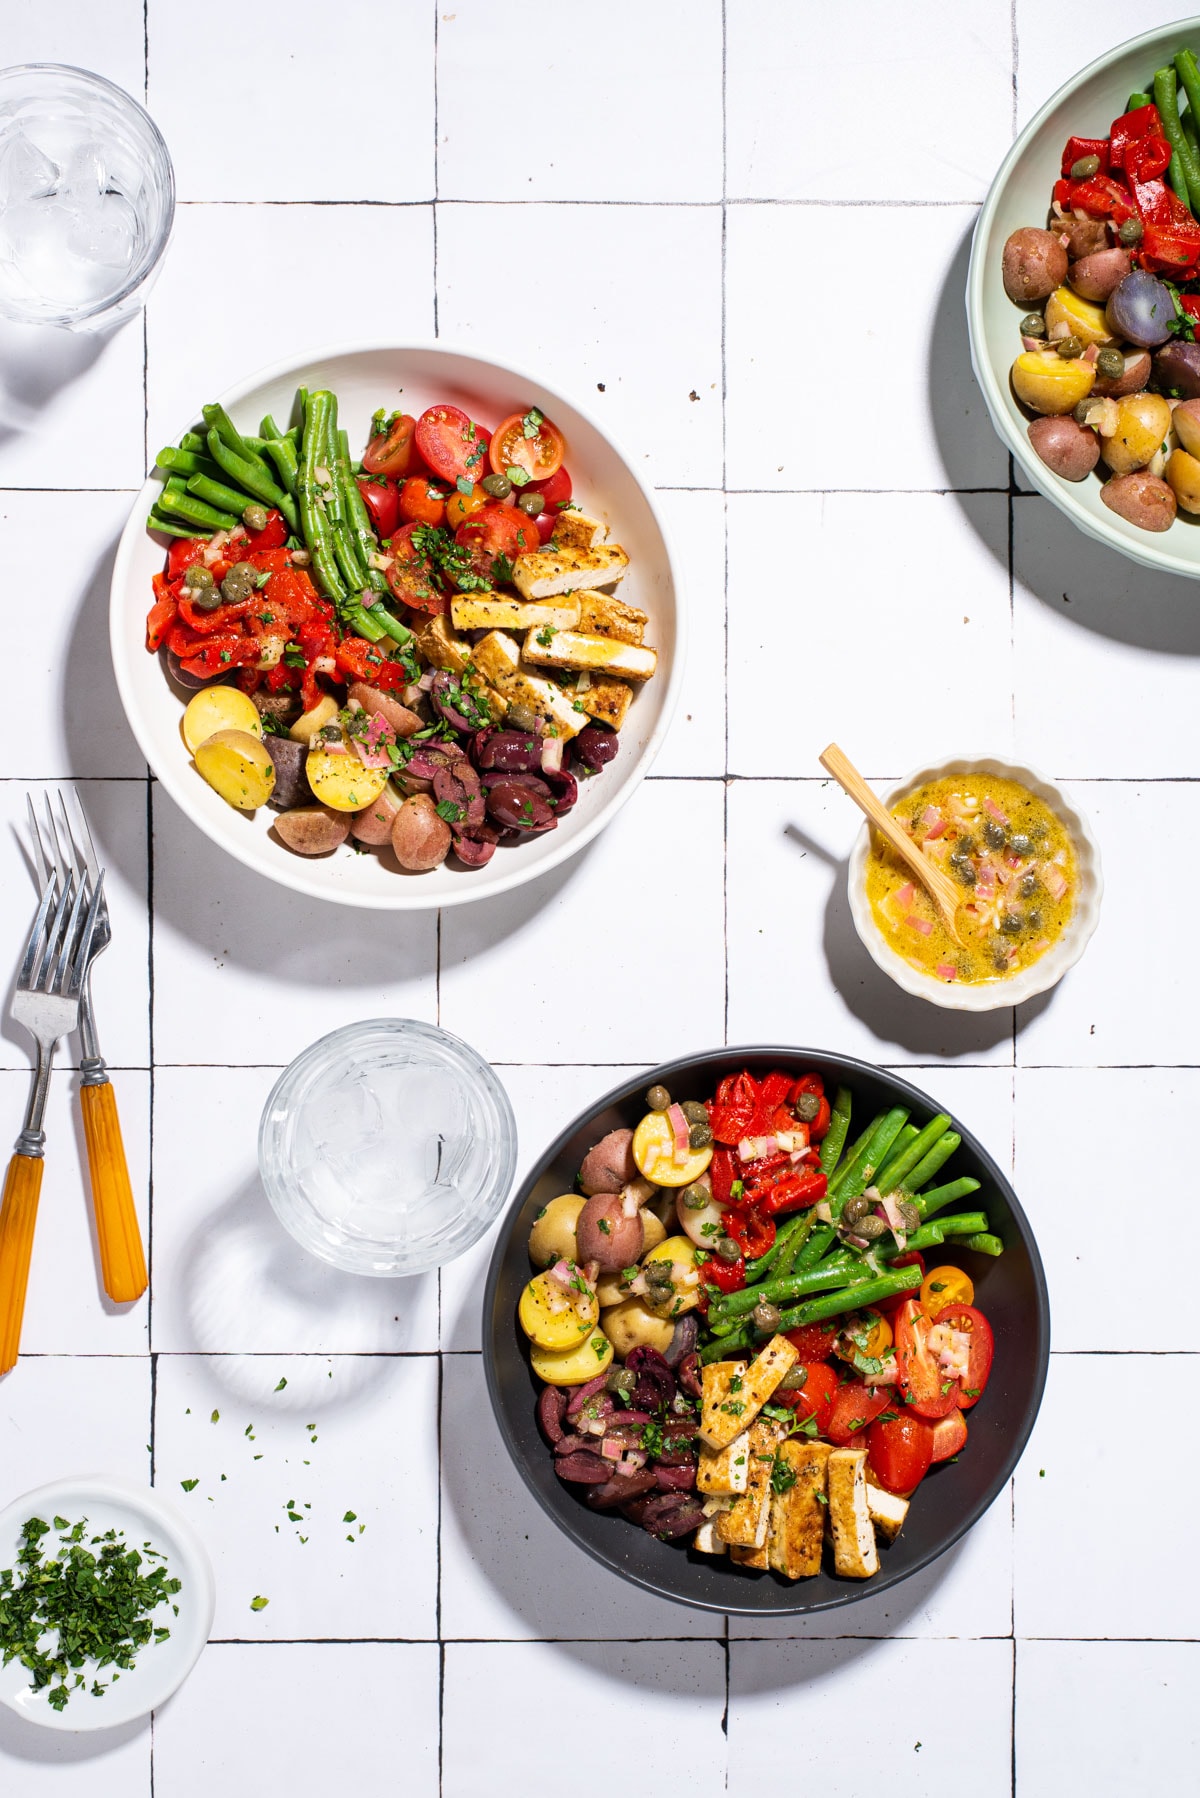 Vegan nicoise salad with tofu, in various bowls on a tiled table.